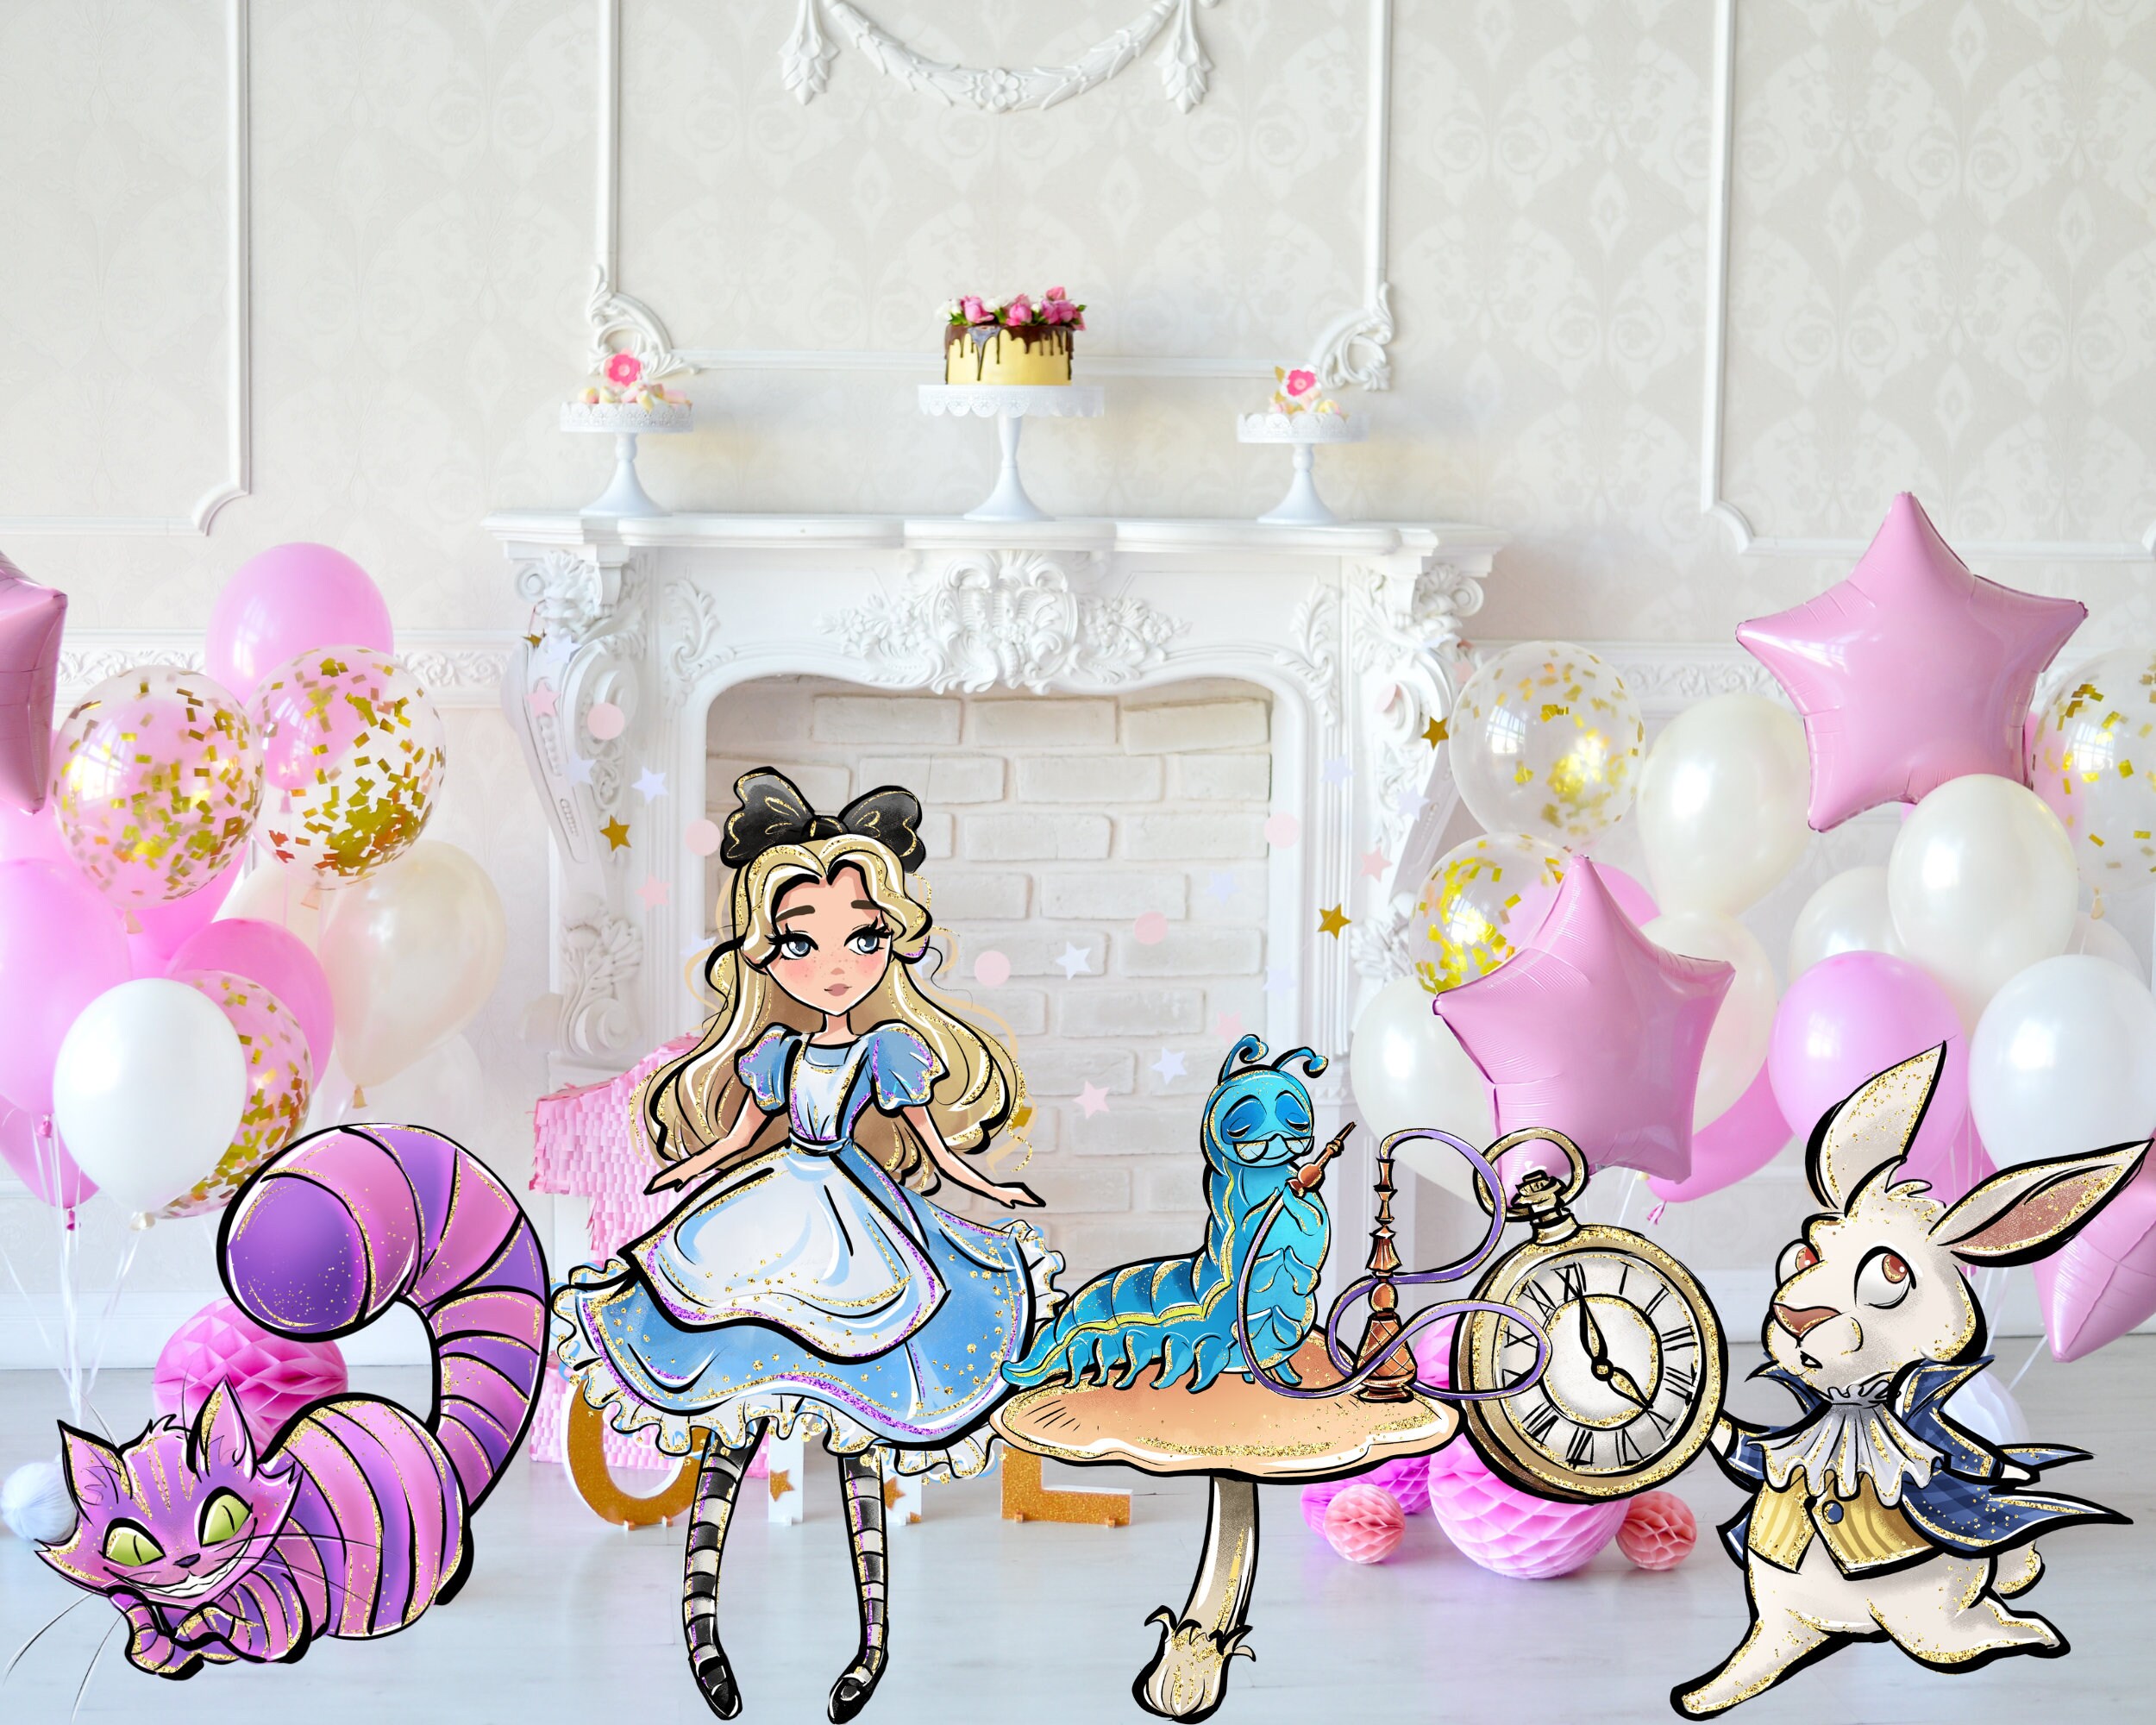  CAILESS Birthday Party Decorations - Alice in